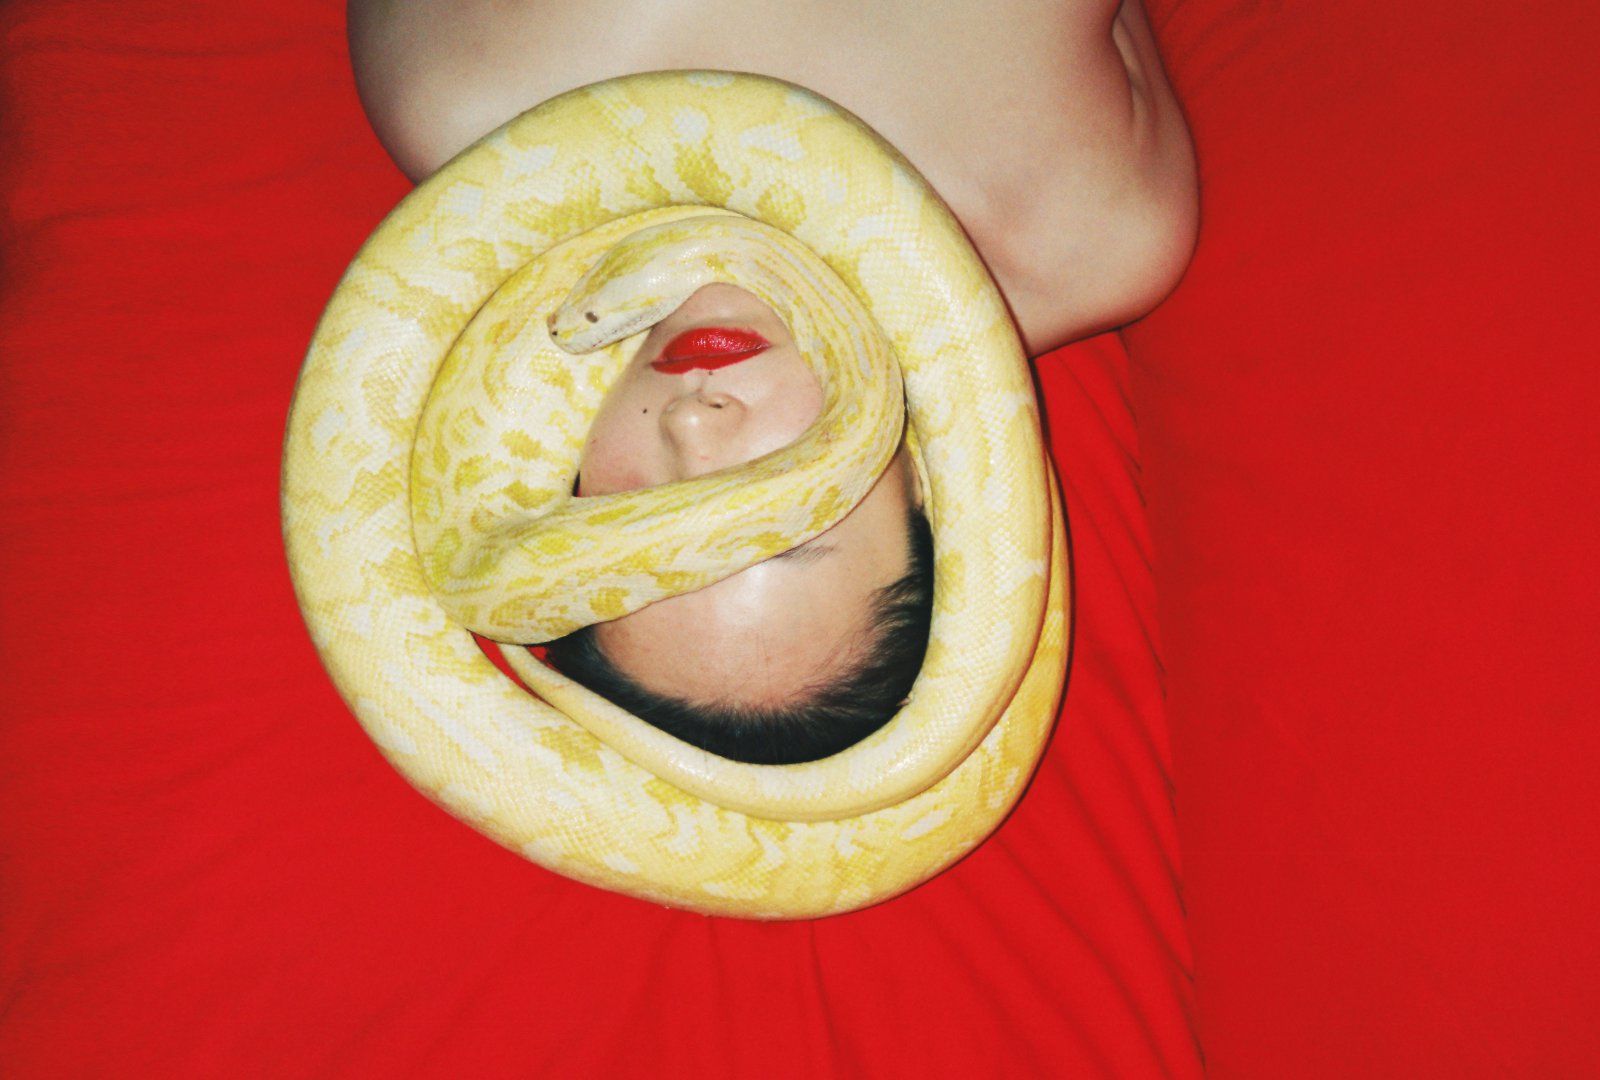 The photographer Ren Hang died this morning